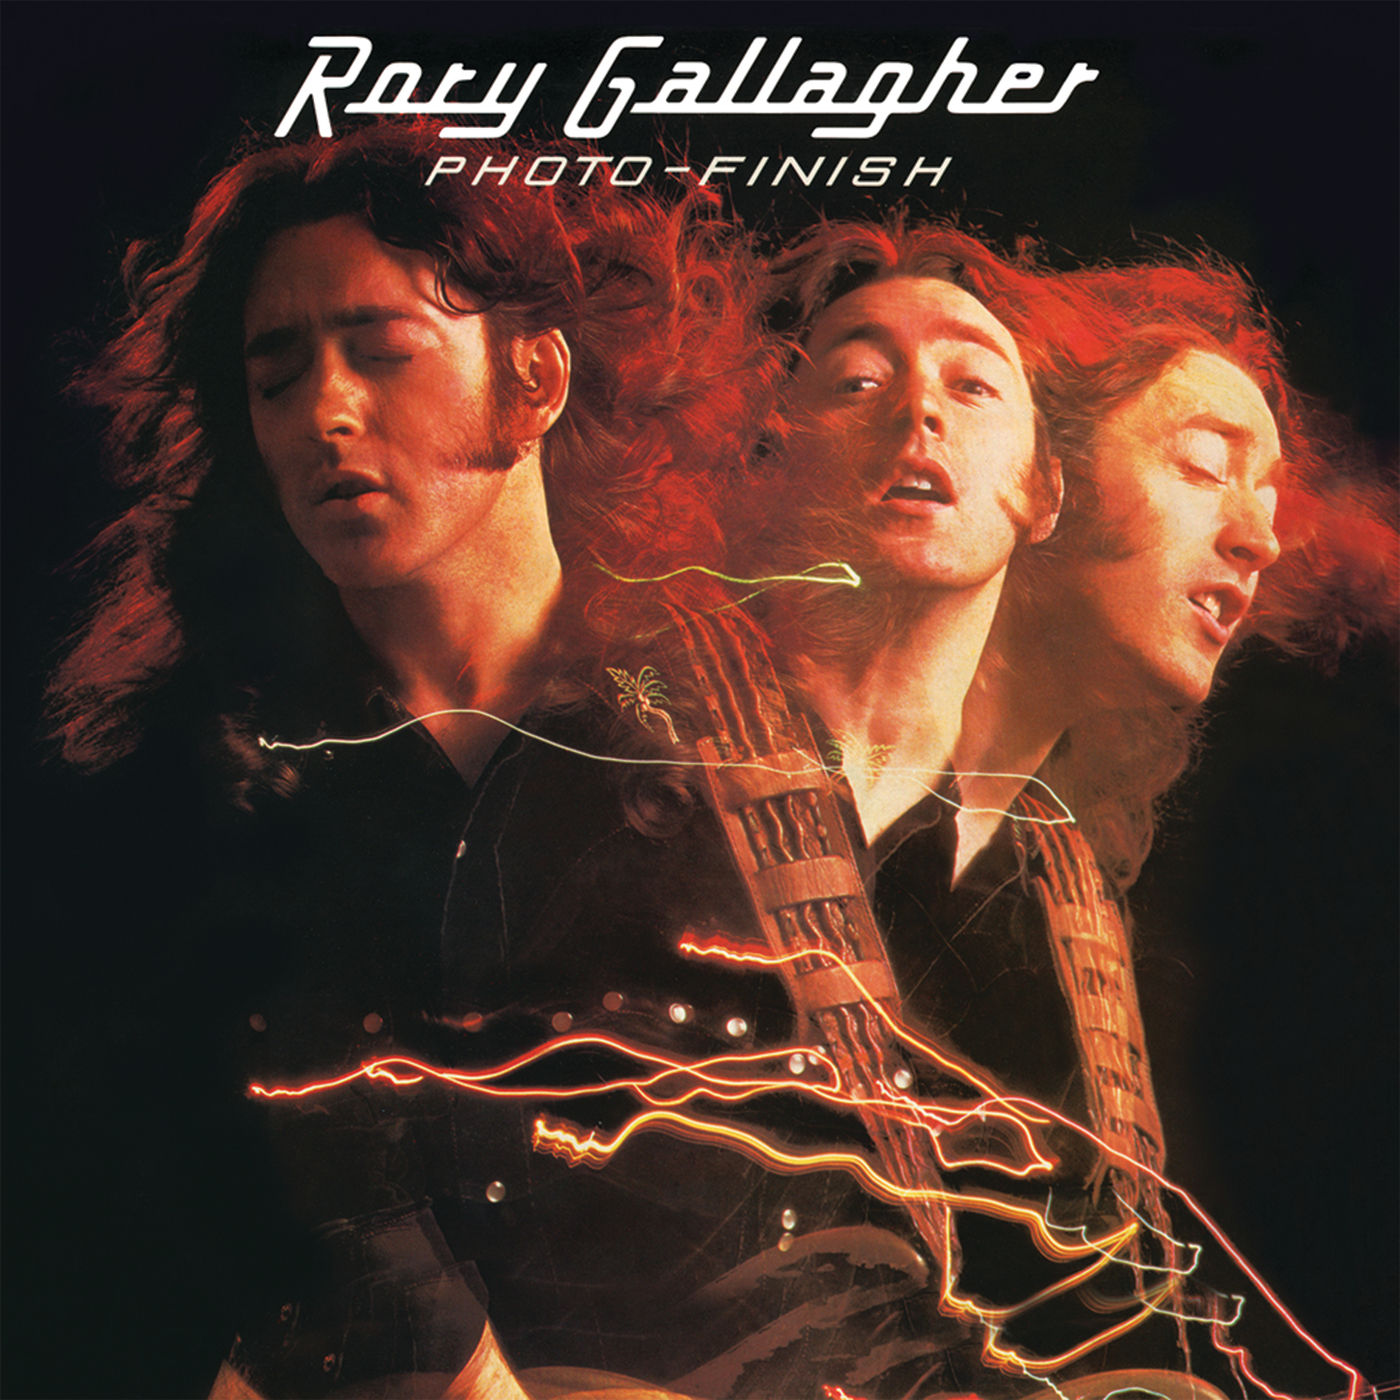 Rory Gallagher - Photo Finish (Remastered) (1978/2020) [FLAC 24bit/96kHz]